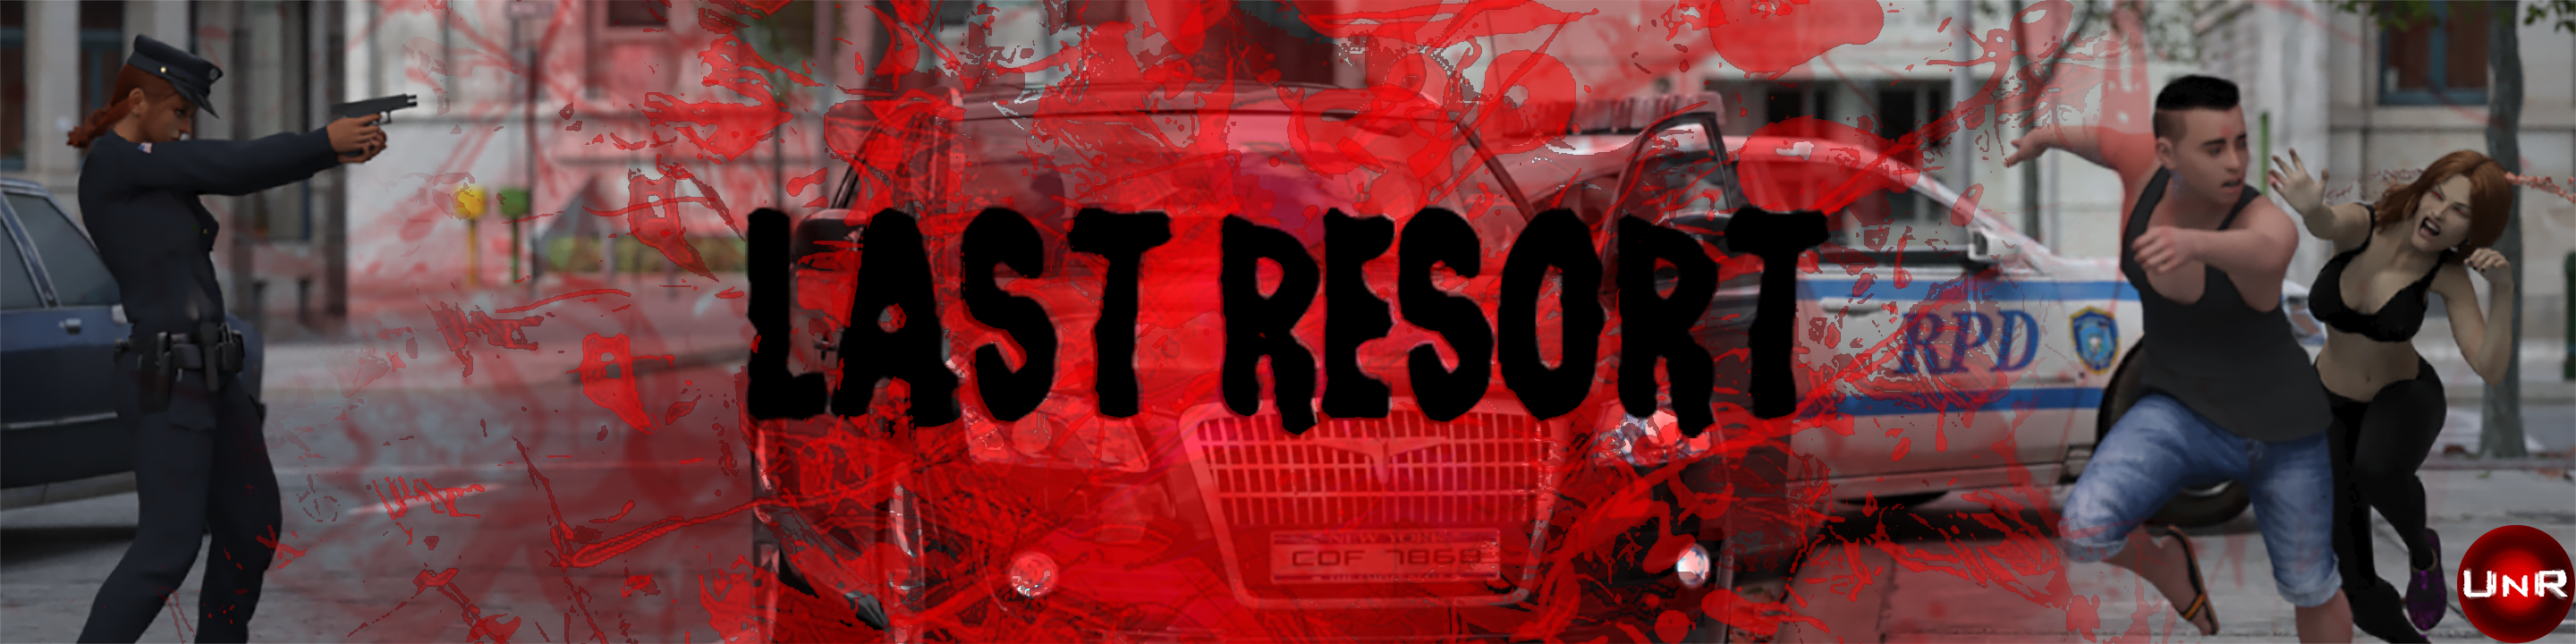 Death,Love and Blood: Last Resort poster